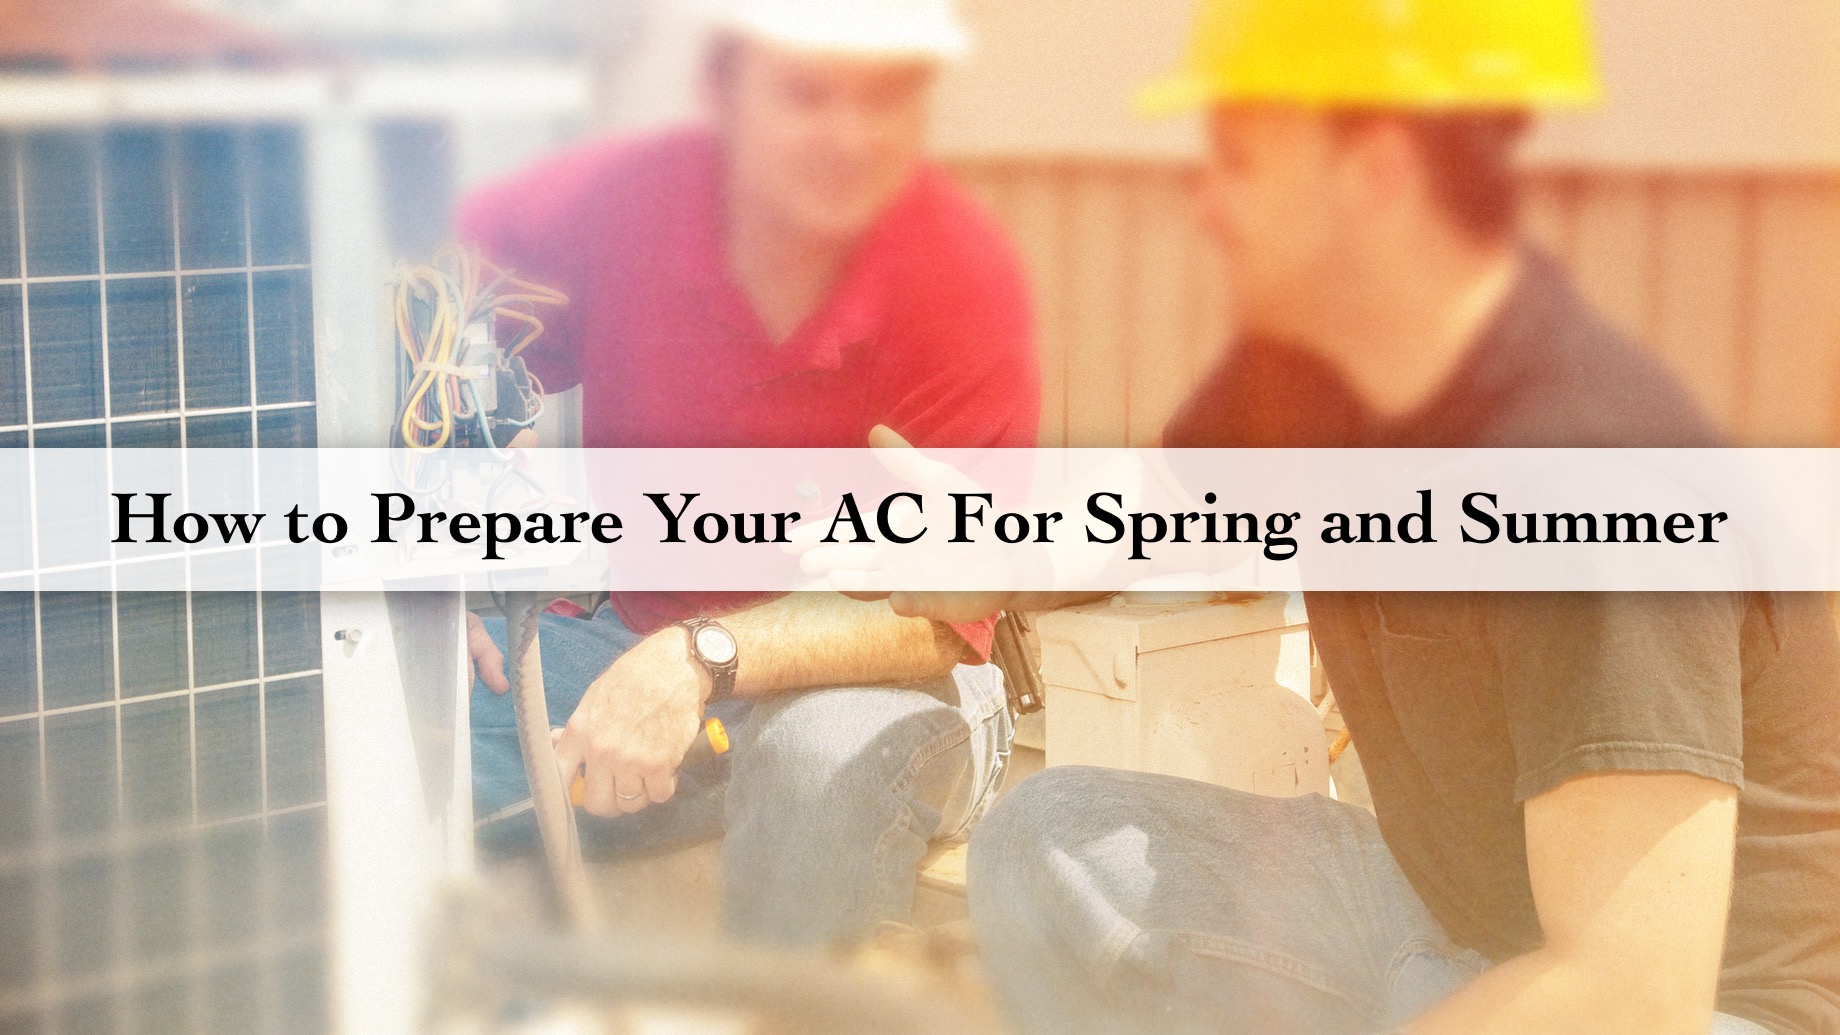 How to Prepare Your AC For Spring and Summer